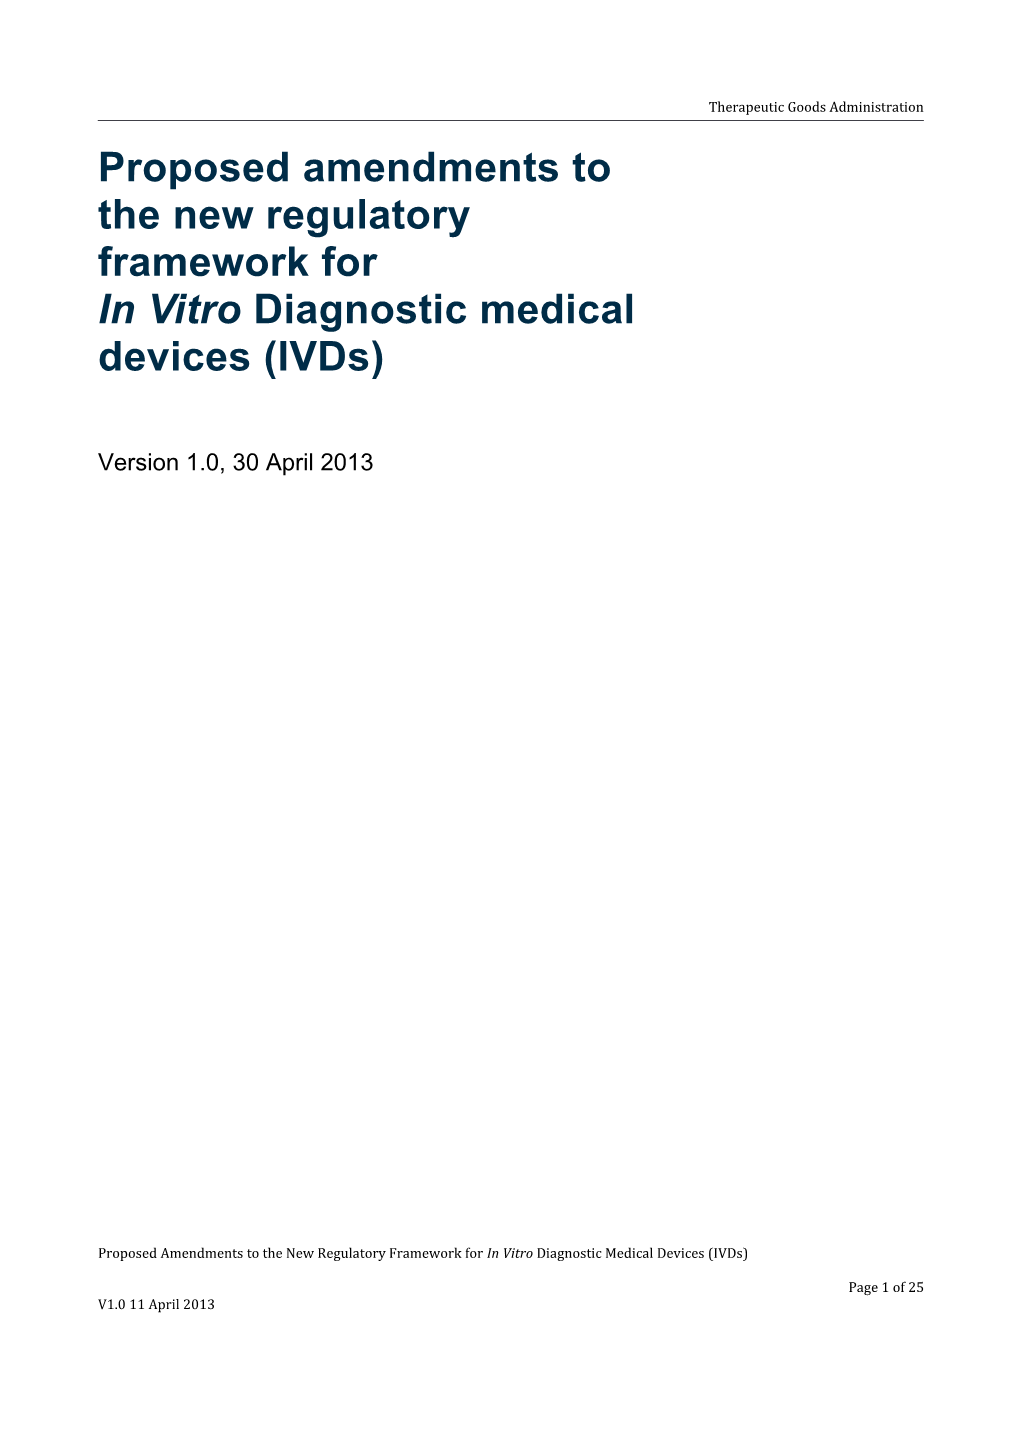 Proposed Amendments to the New Regulatory Framework for in Vitro Diagnostic Medical Devices